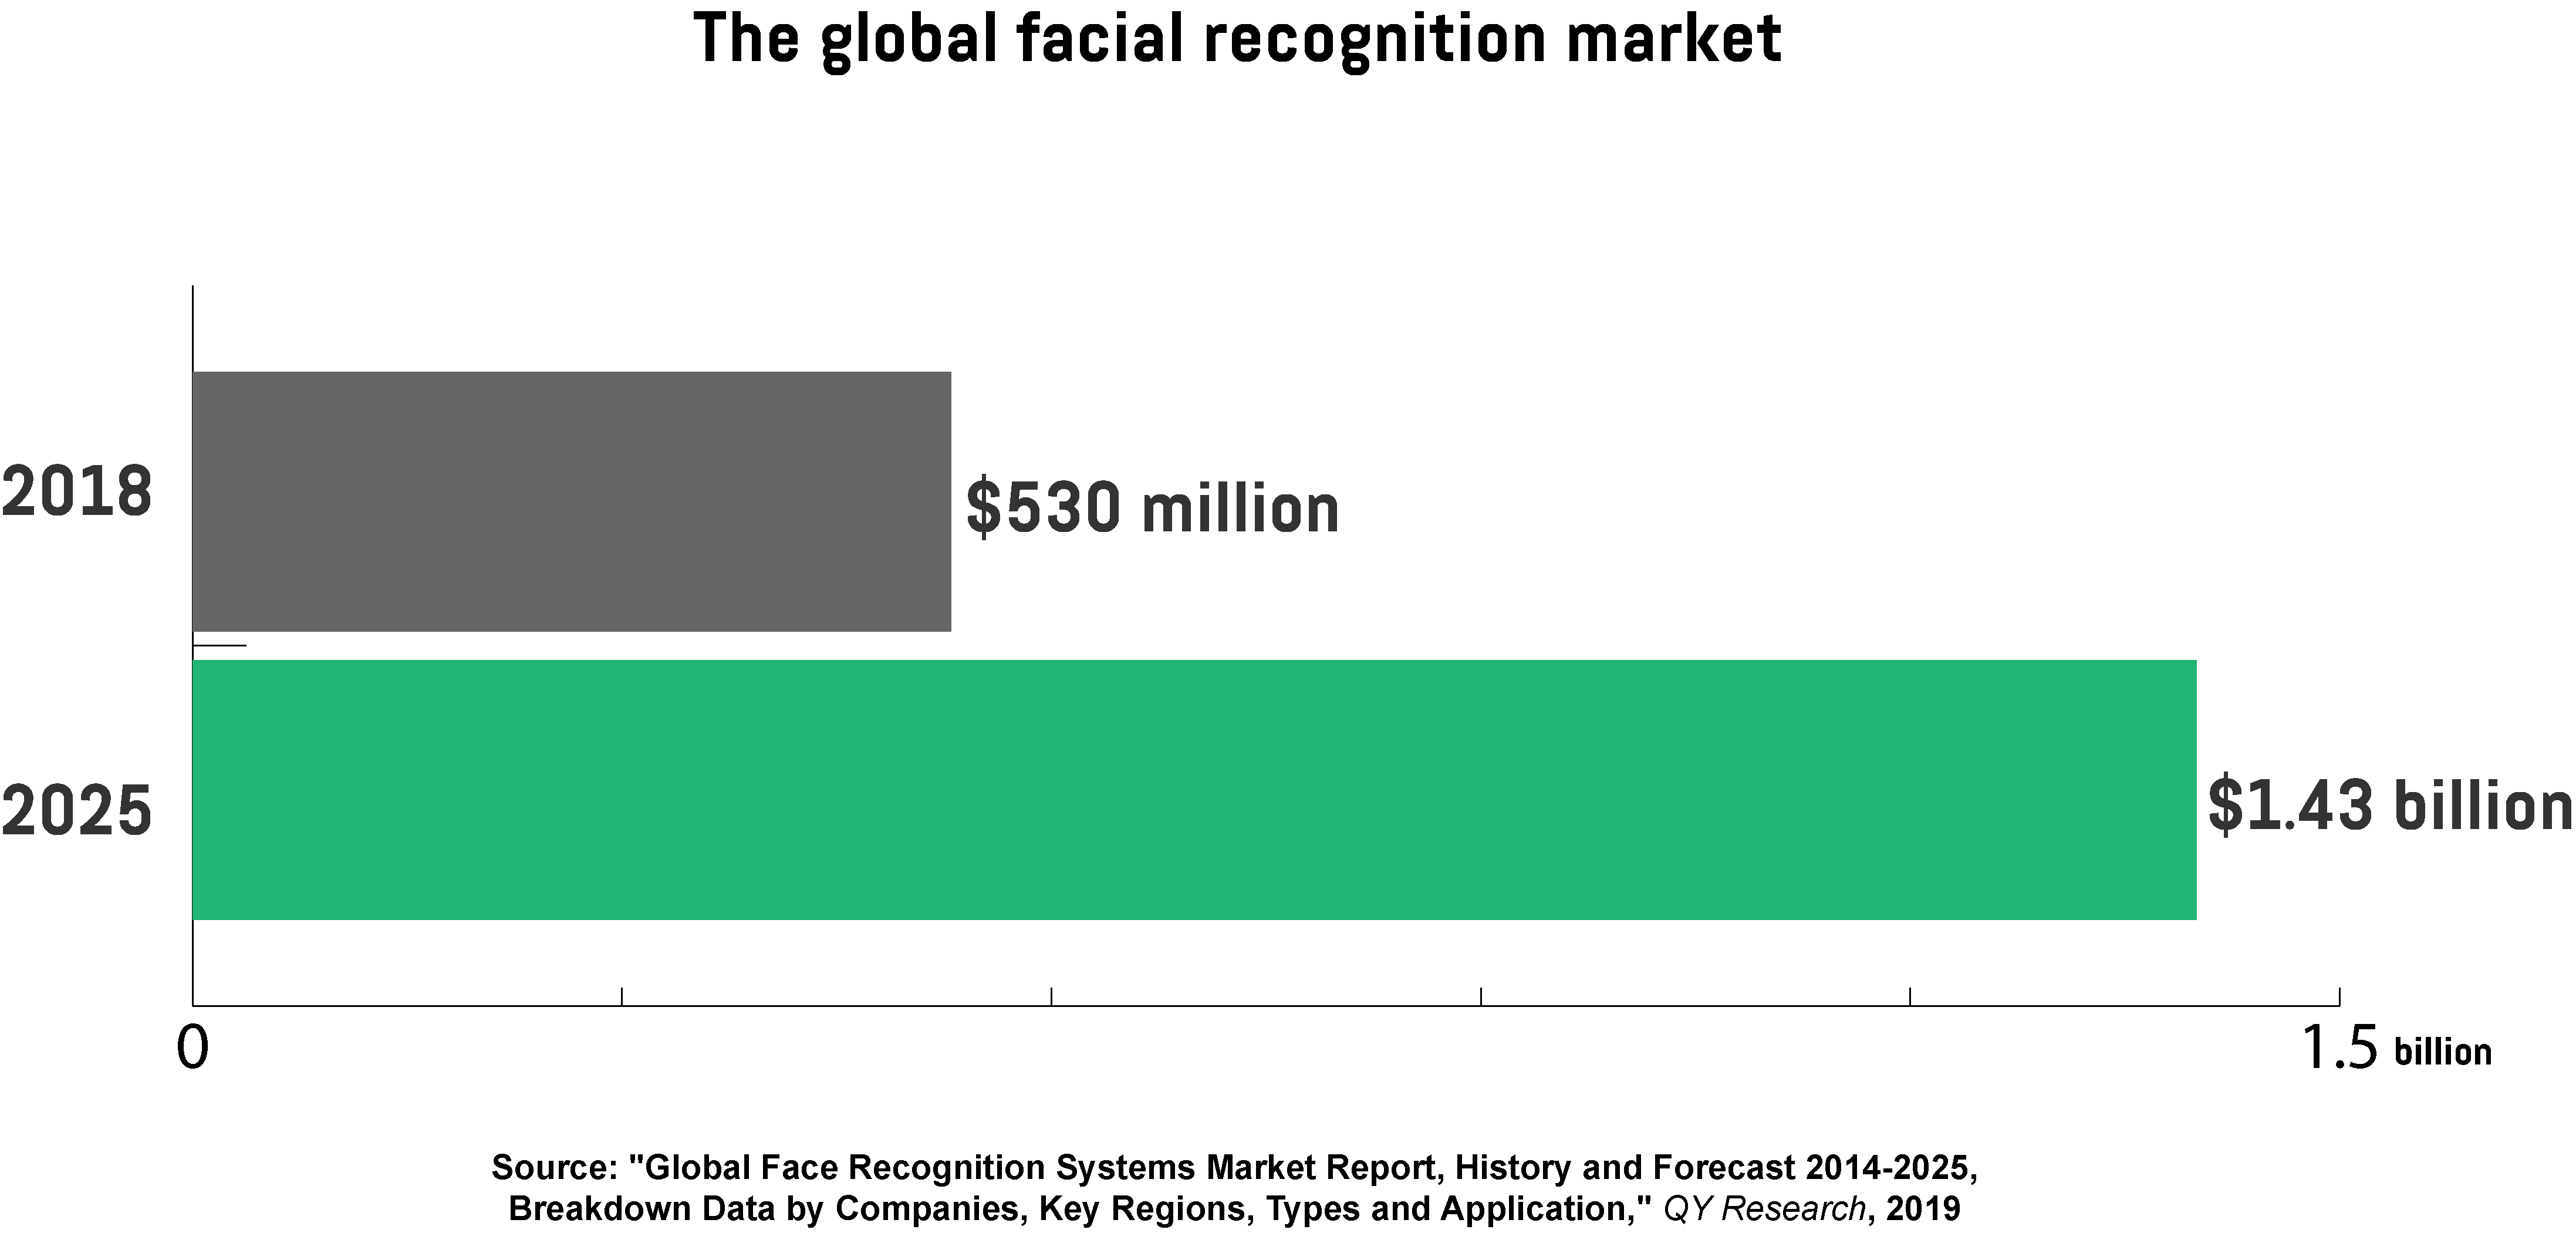  A horizontal bar graph showing the value of the global facial recognition market in 2018 and the forecasted value in 2025